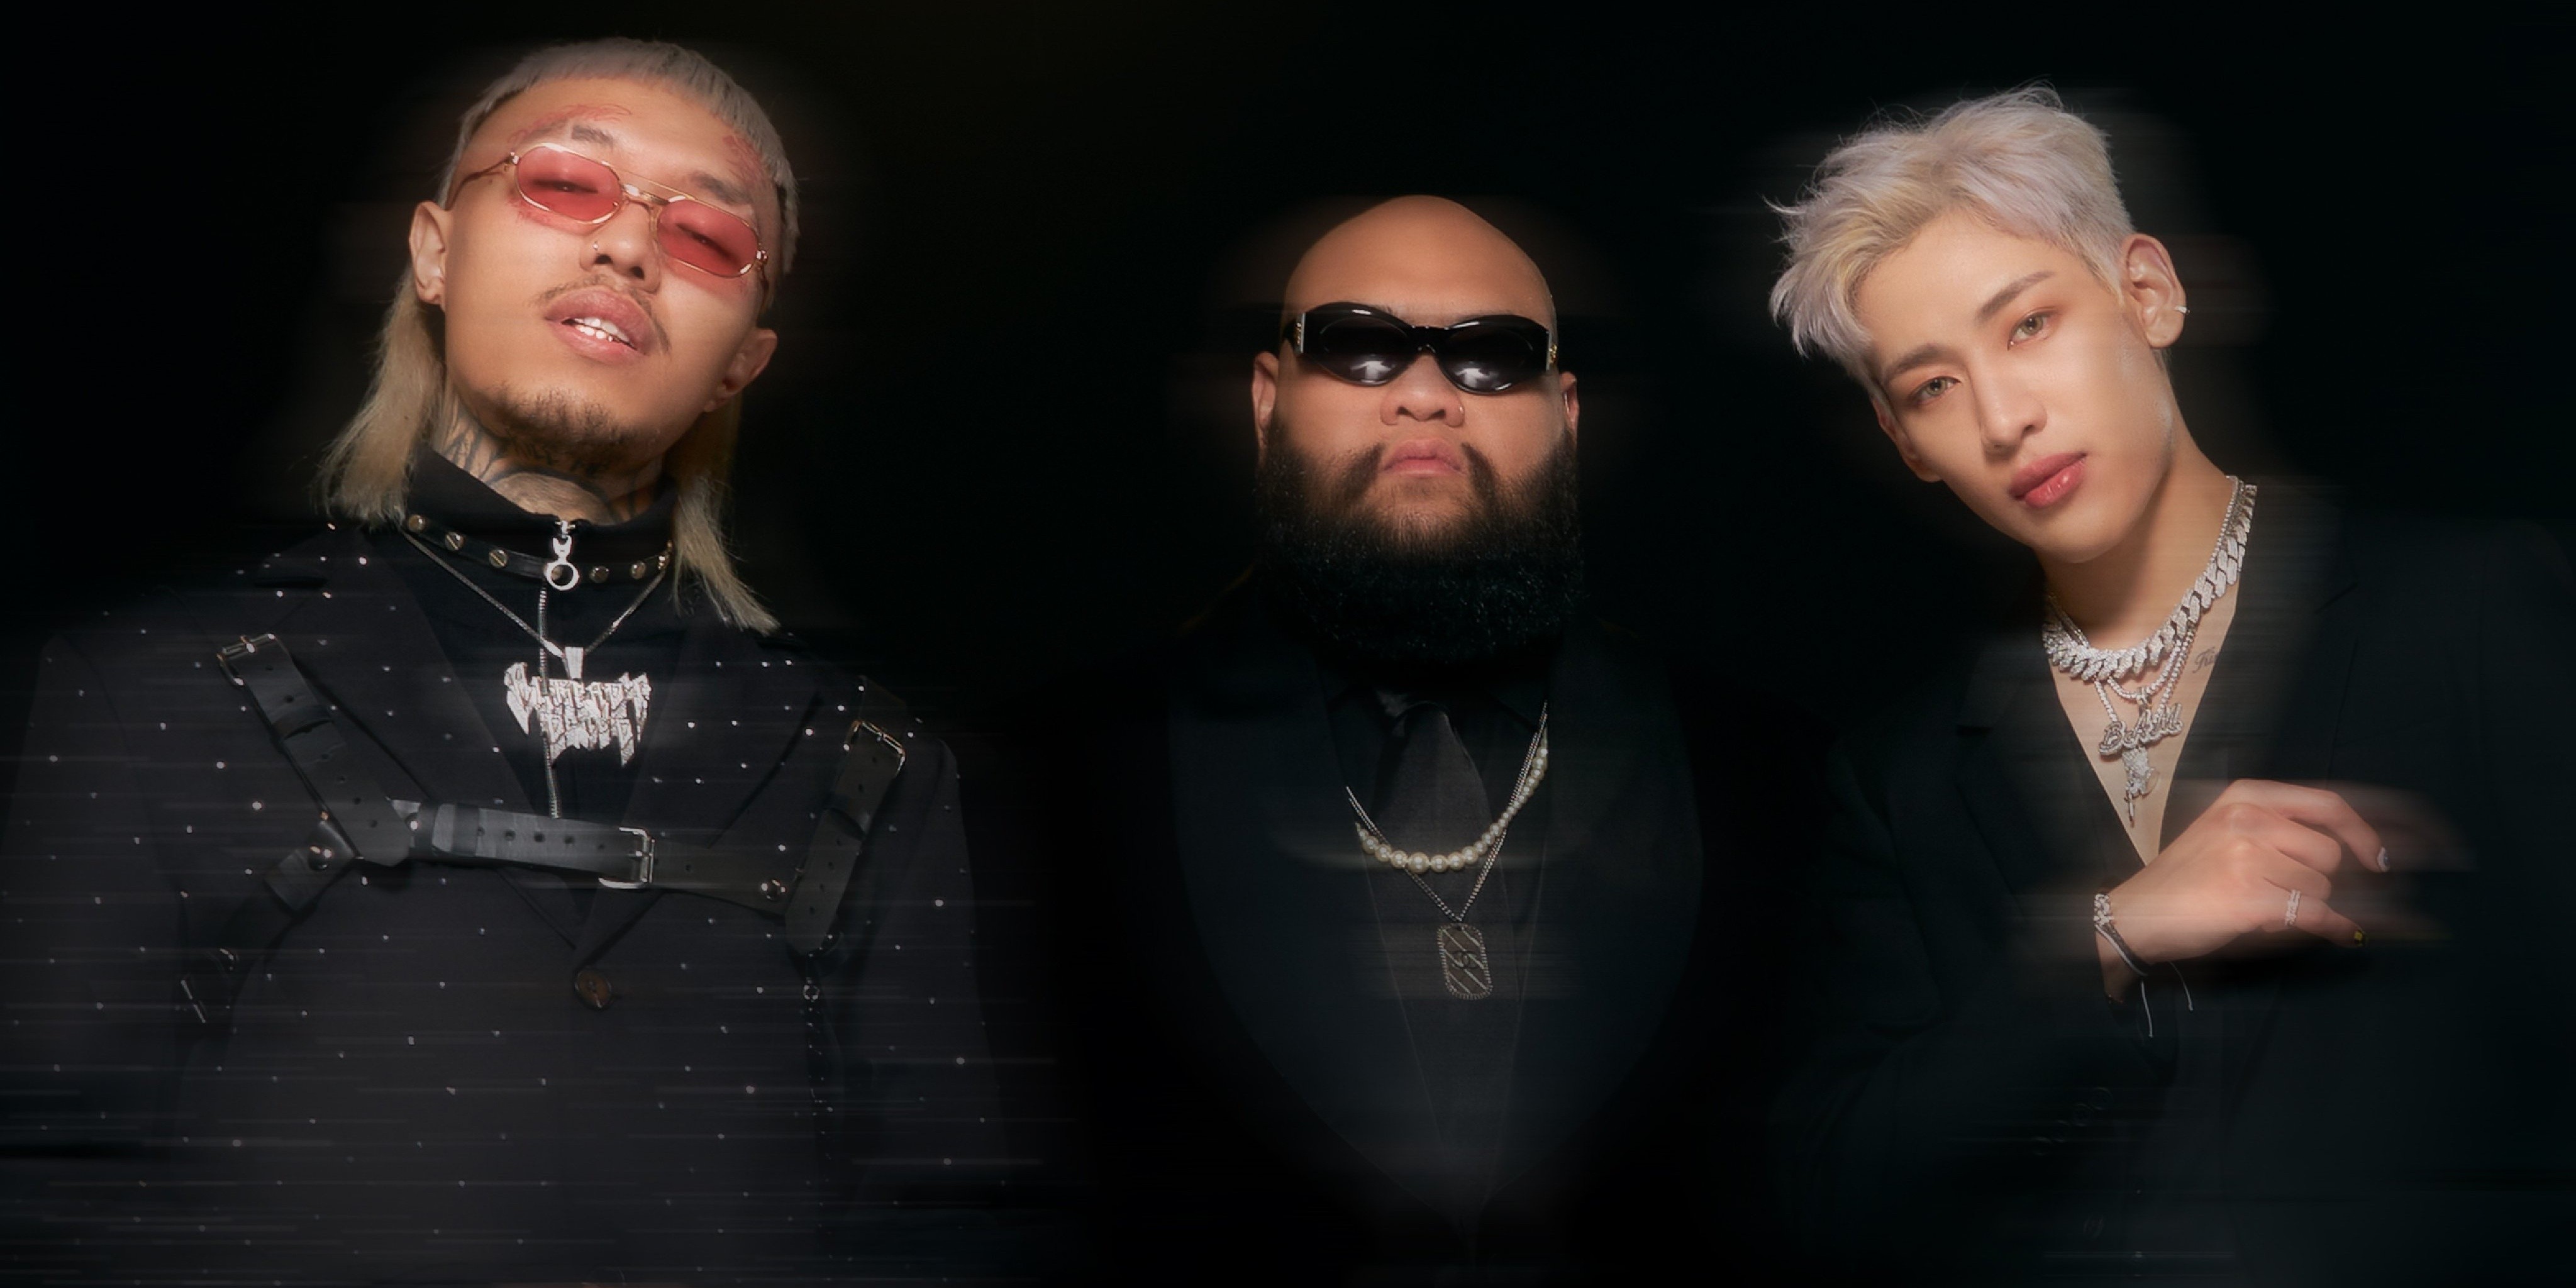 F.HERO and BamBam drop new single 'Skrrt' featuring YOUNGOHM — watch